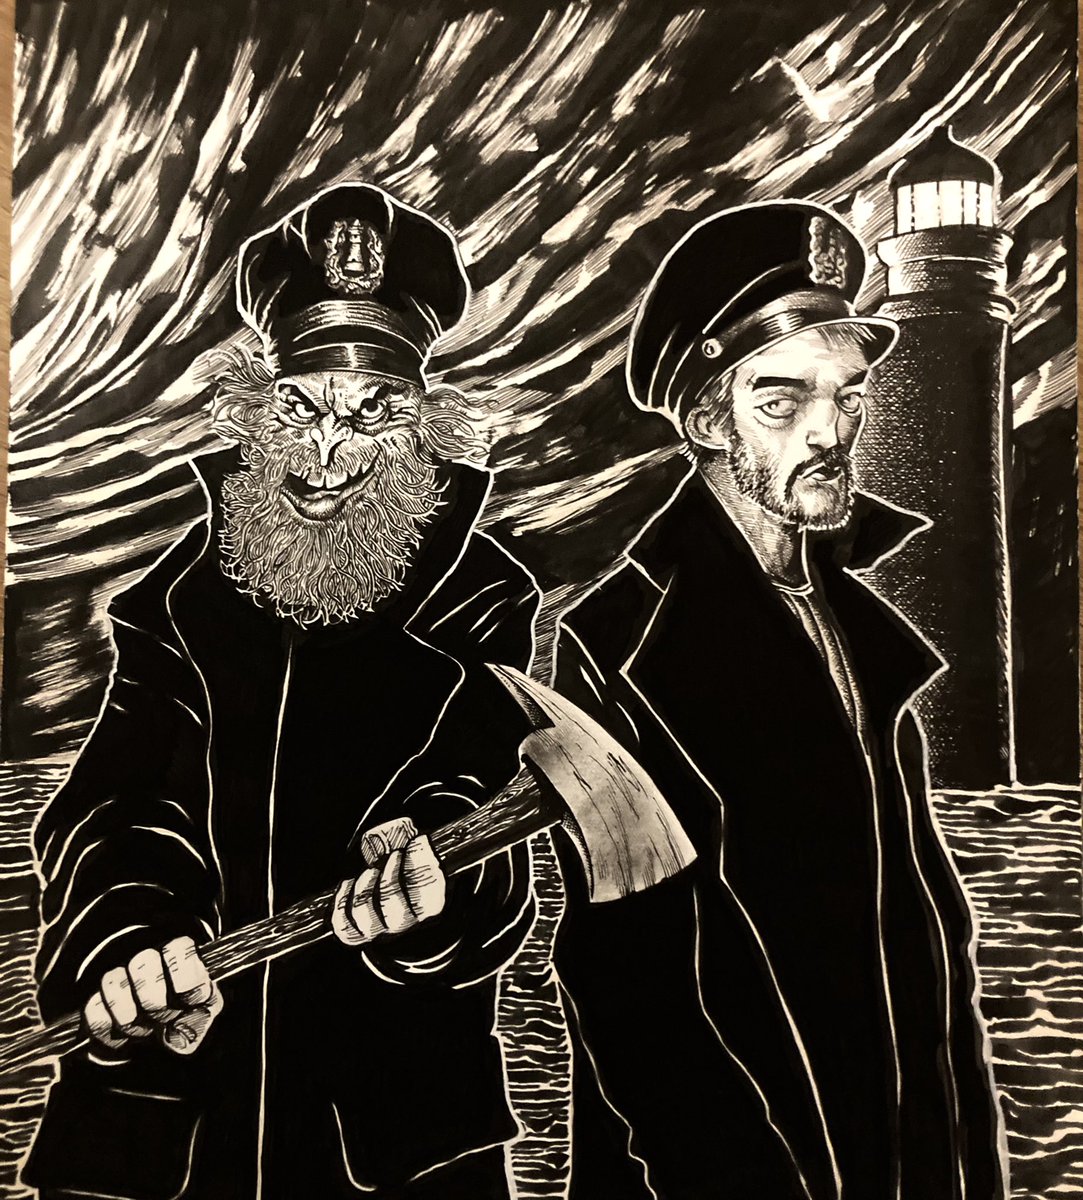 Thomas and Thomas. #thelighthouse #RobertPattinson #WillemDafoe #inkdrawing #a24 #drawing https://t.co/KVGwxnZ5IY.